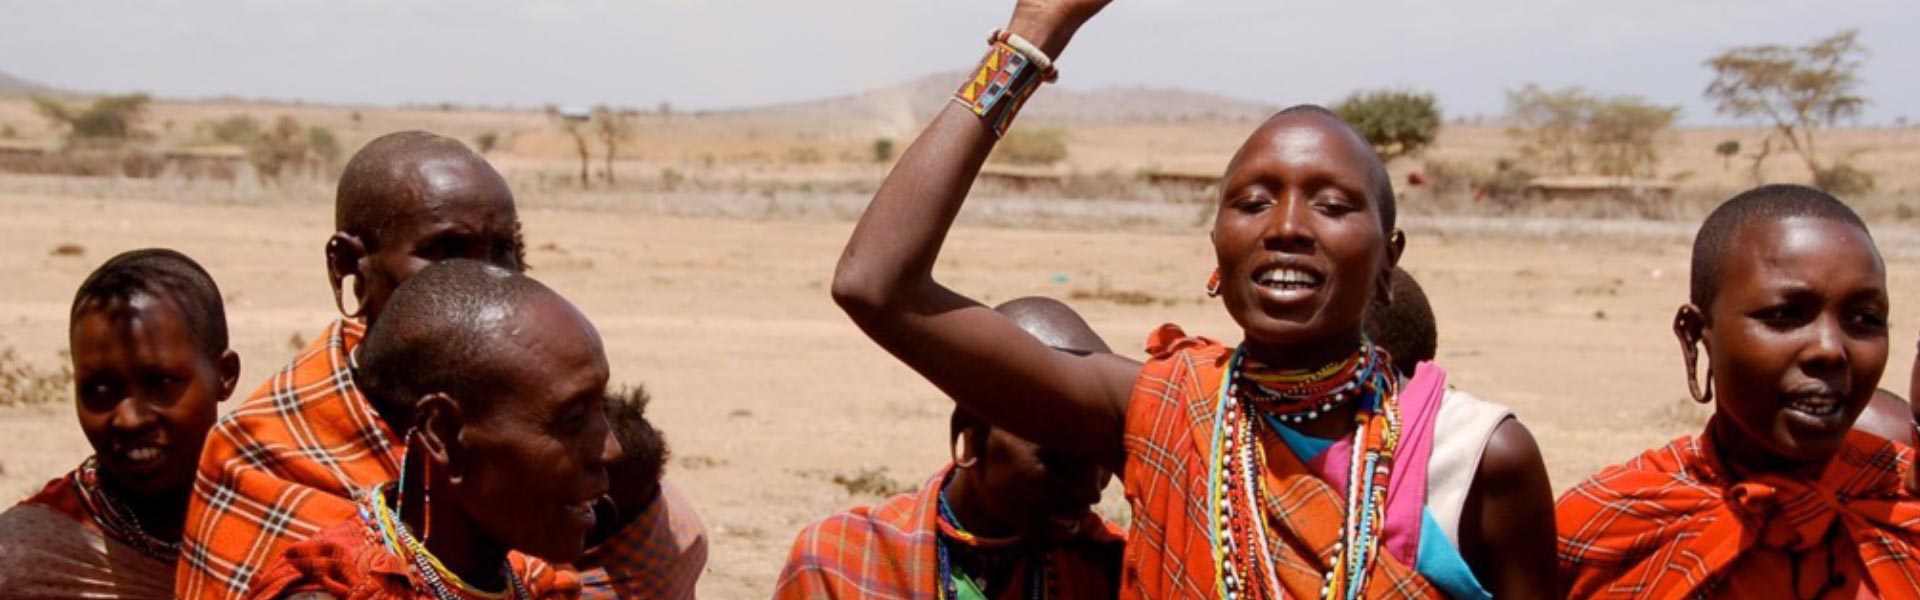 Community Development

WORKING TO ALLEVIATE EXTREME POVERTY AND SPIRITUAL HUNGER.

The Maasai of Kenya have turned to faith in Jesus in significant numbers in recent decades. However, they live in extreme poverty...
